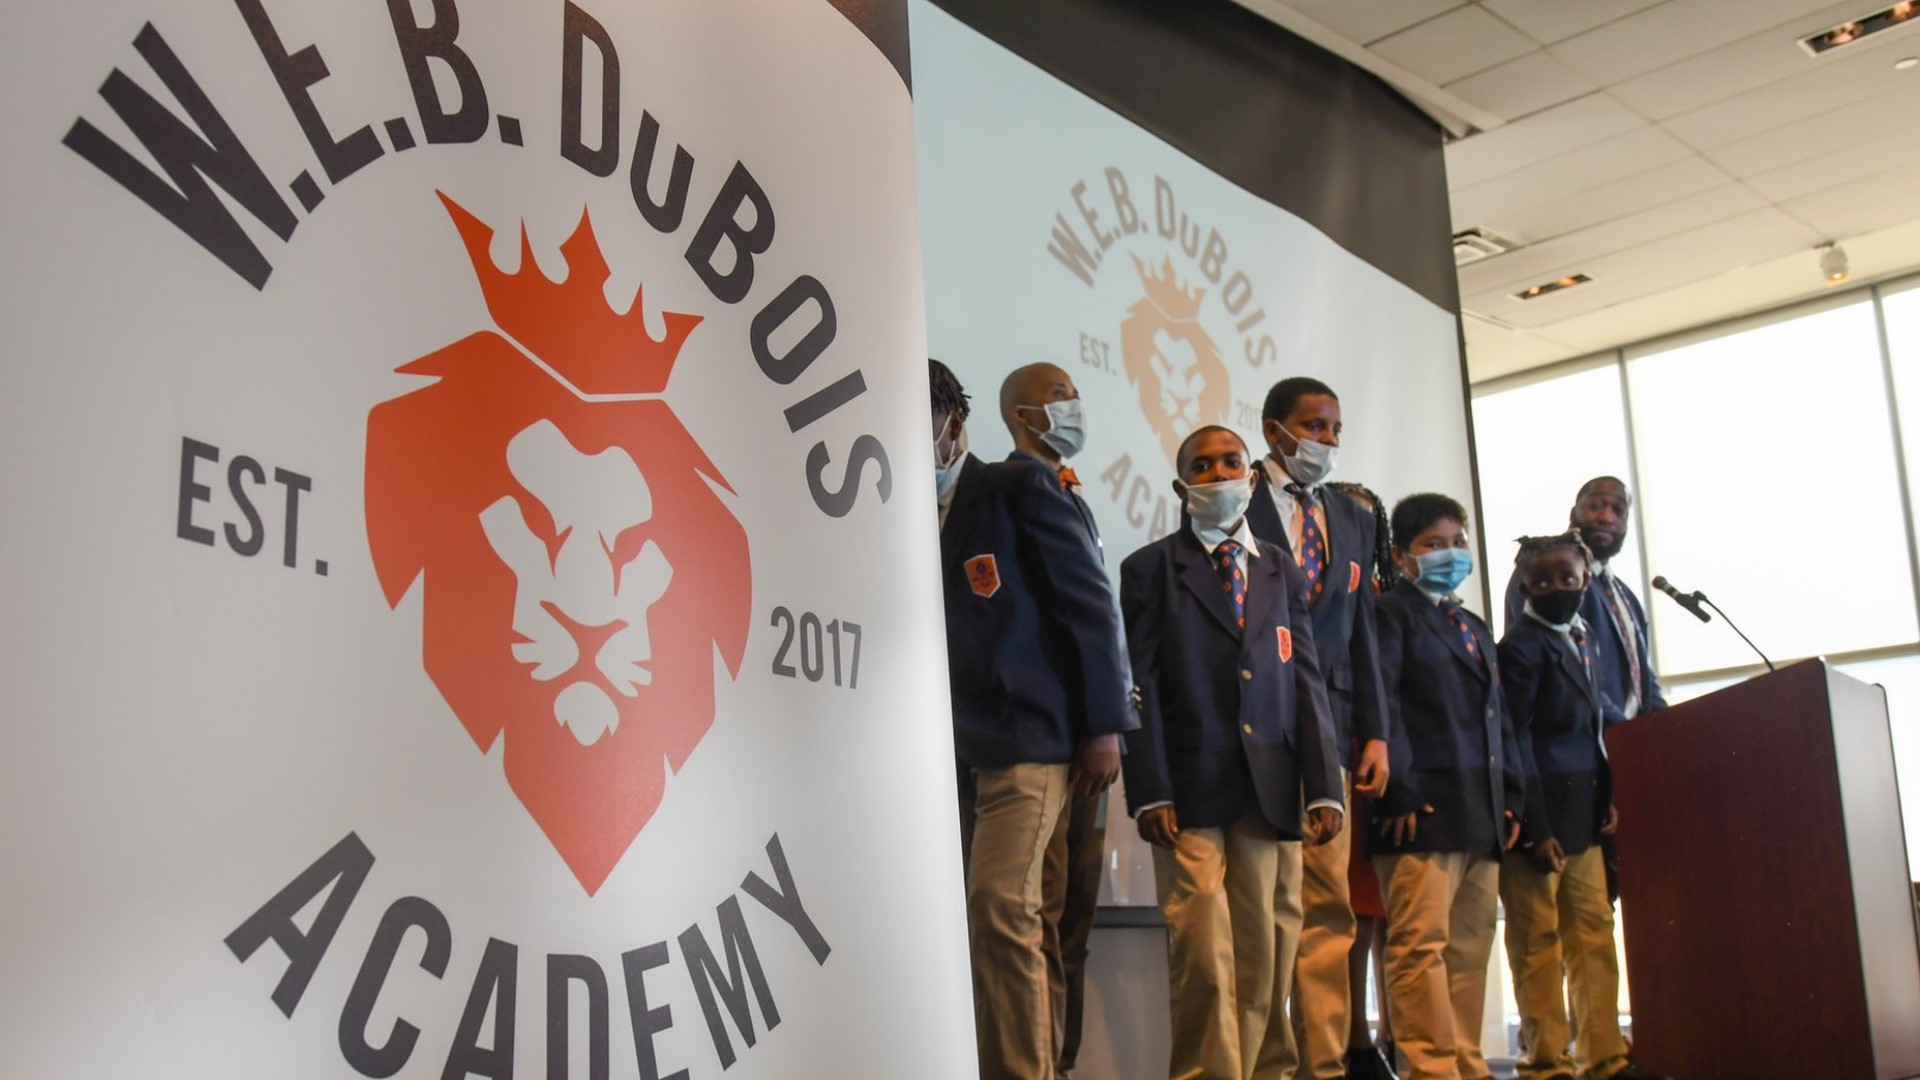 The 6th graders heading to the all-boys school had their jacket and tie ceremony Wednesday at the Ali Center.